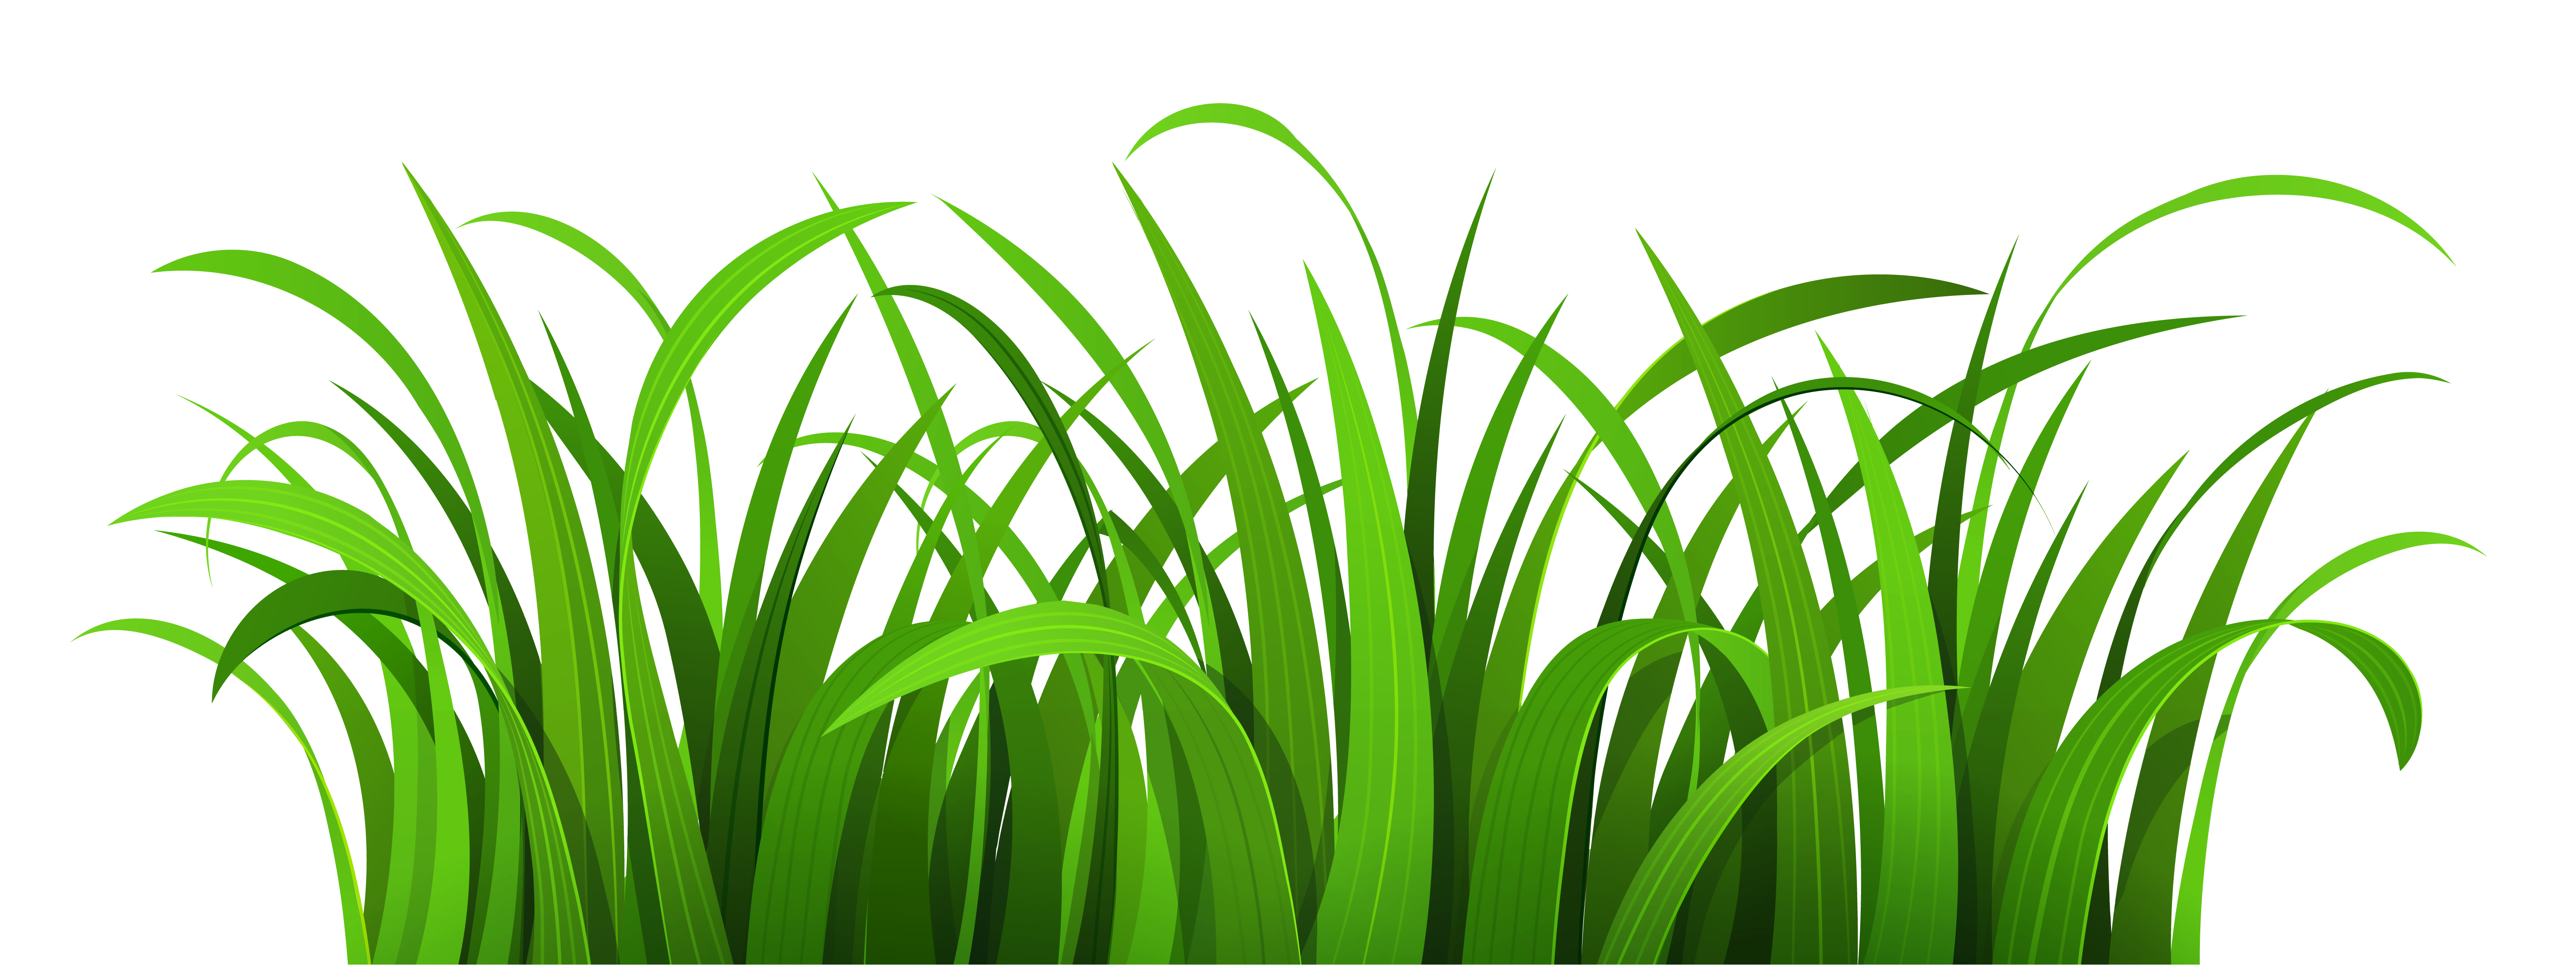 Grass Patch PNG Clipart | Clipart Panda - Free Clipart Images